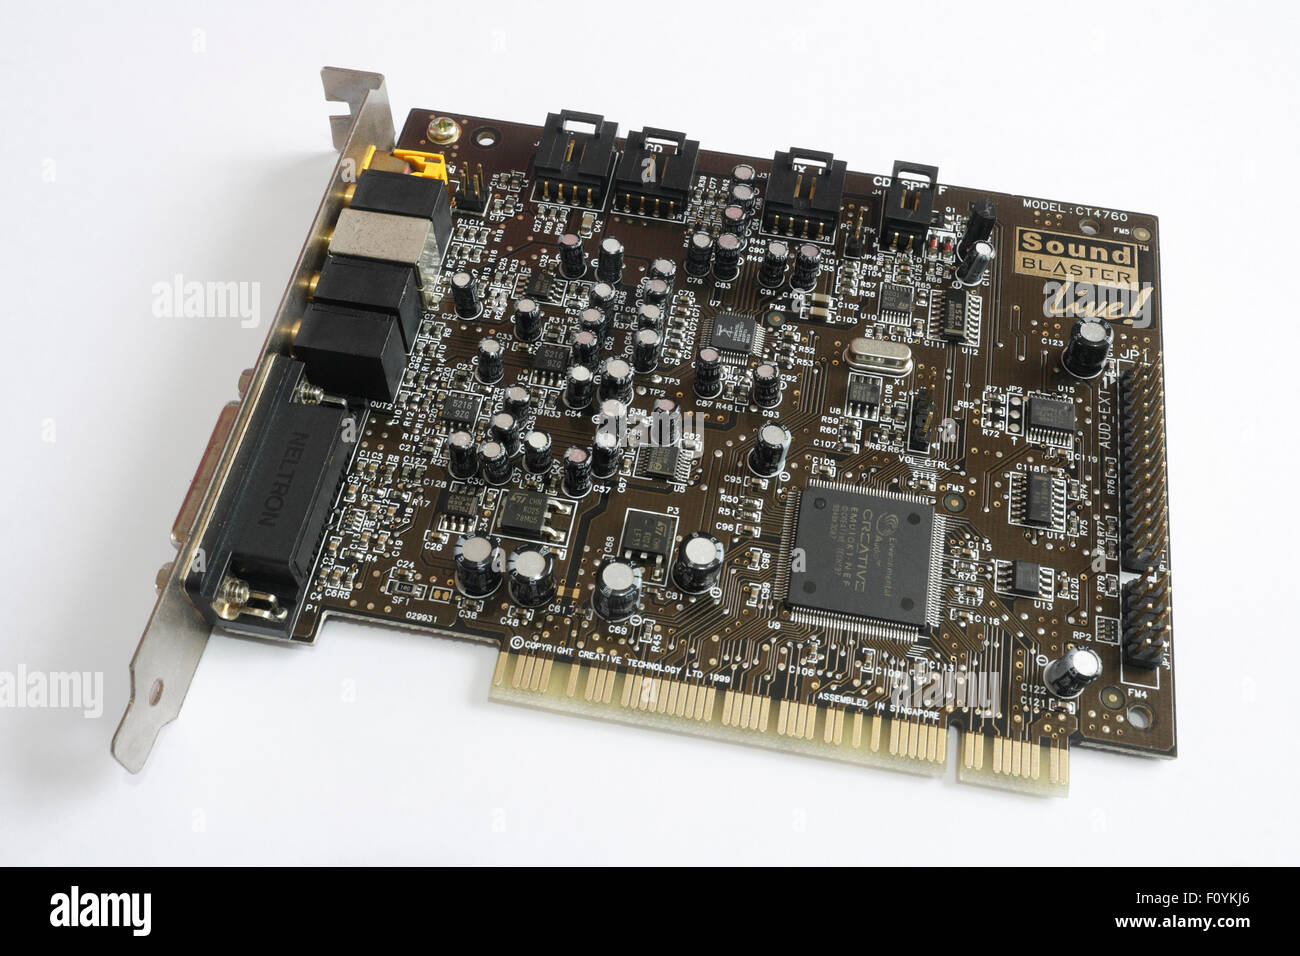 Sound Blaster Computer Card, hardware electronic components Stock Photo